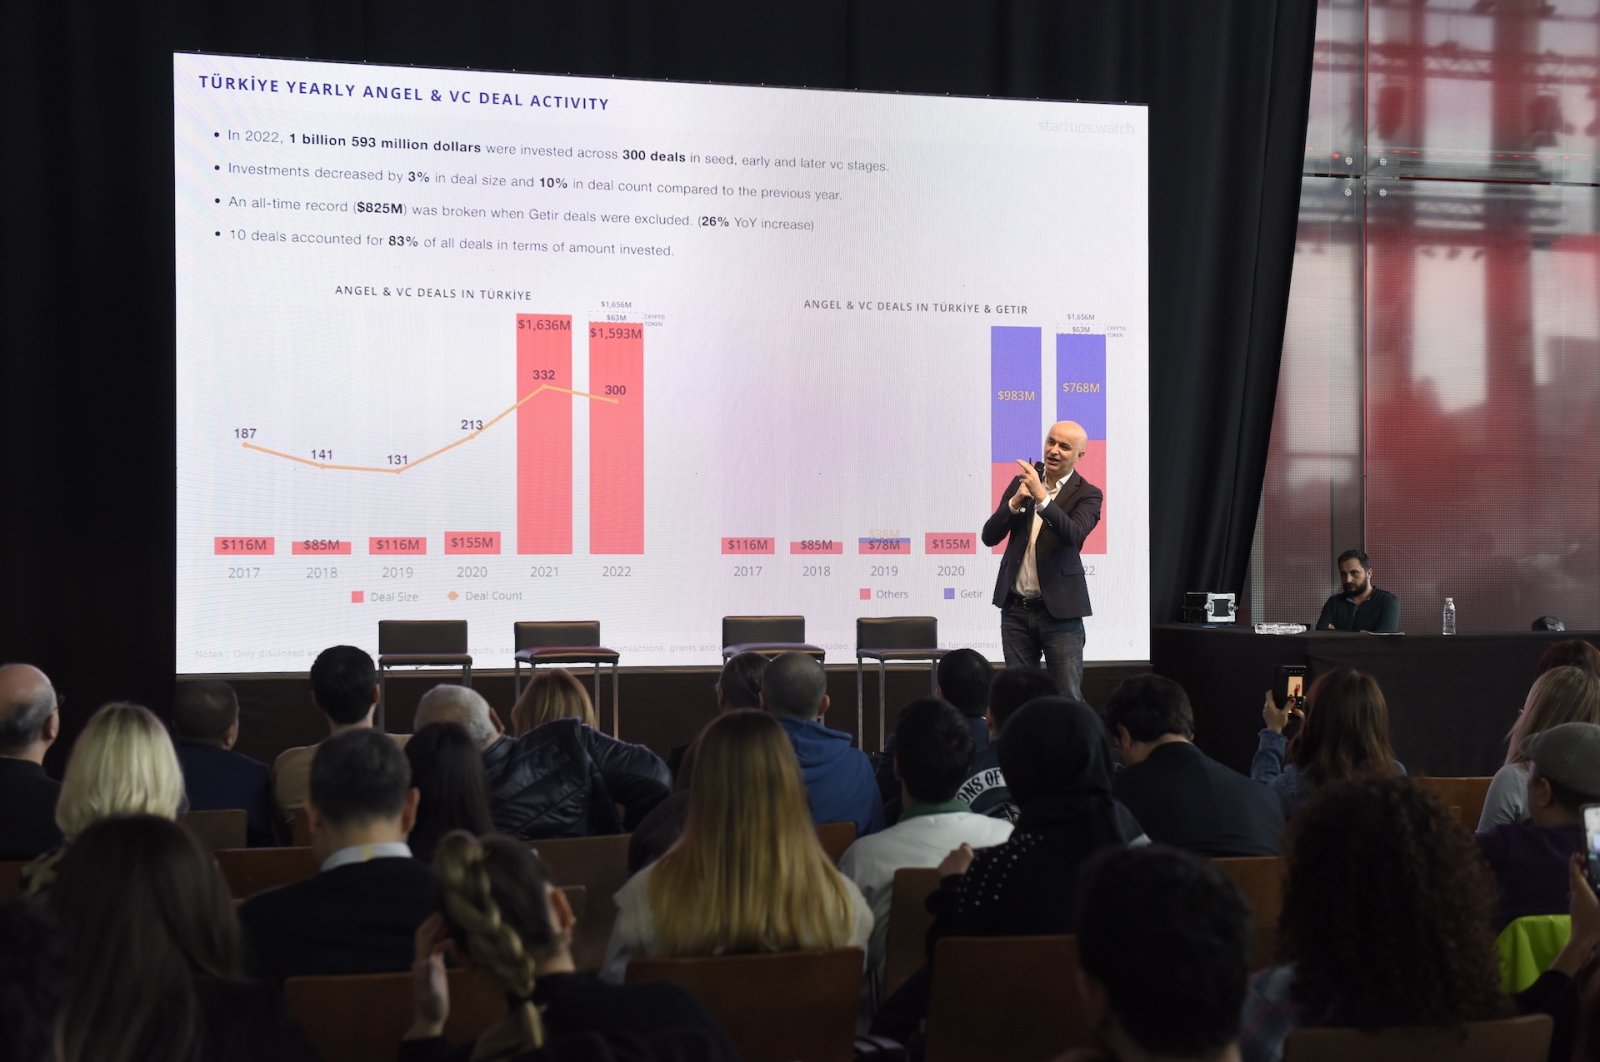 Serkan Ünsal, founder of startups.watch, speaks during the announcement of the 2022 startup investment figures, in Istanbul, Türkiye, Jan. 17, 2023. (Courtesy of startups.watch)